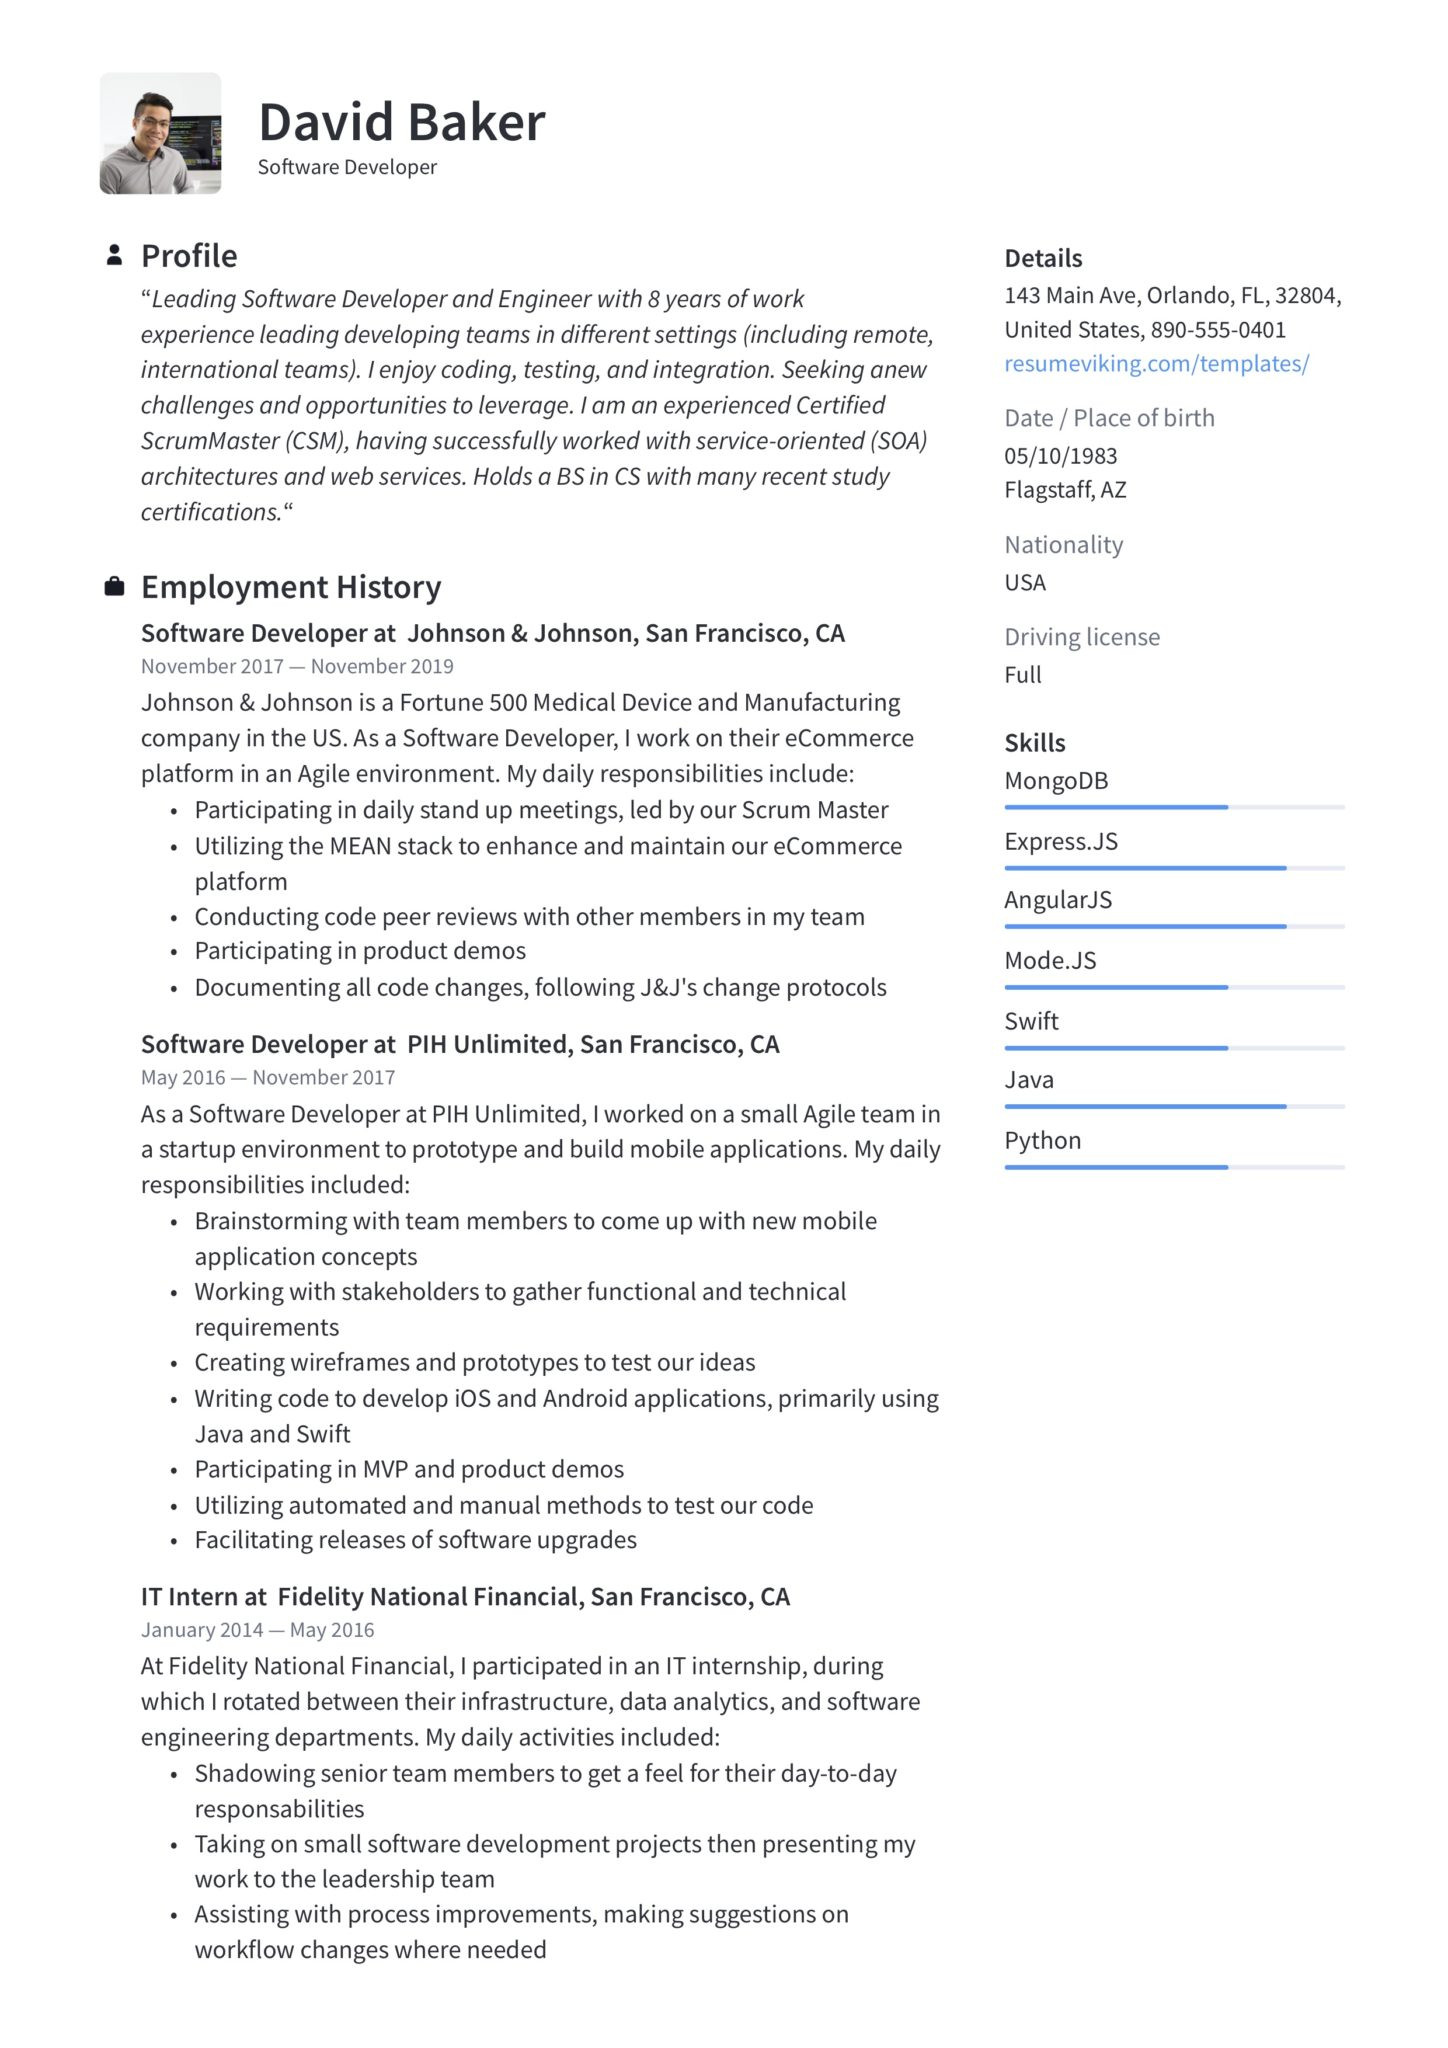 Sample 2 Page Resume software Developer 15 Years Experience Guide: software Developer Resume  19 Examples Word & Pdf 2020